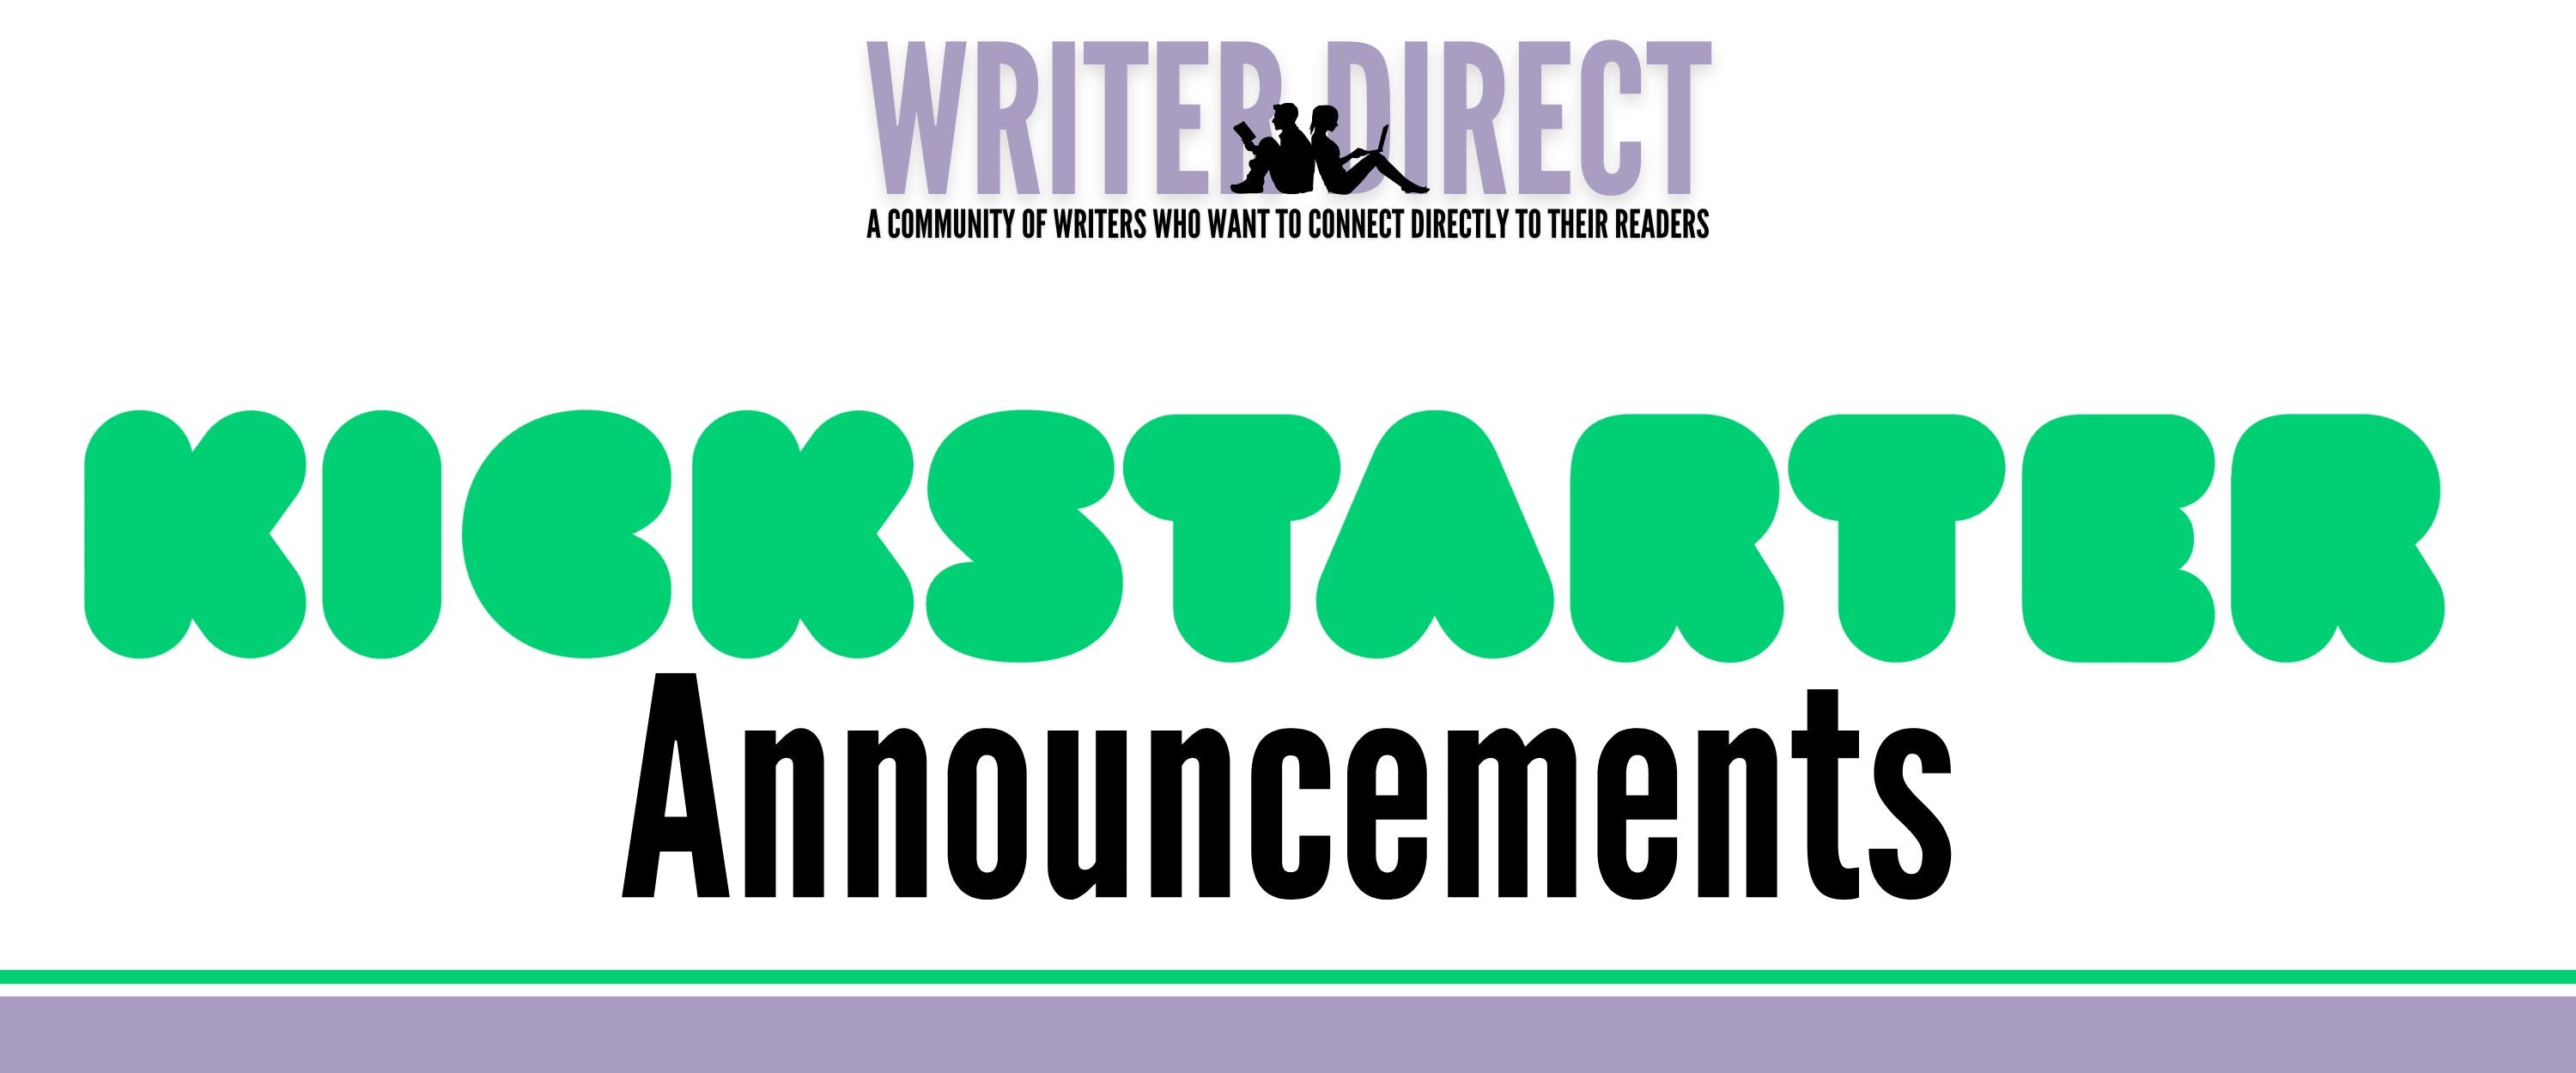 Writer Direct - Announcements banner image